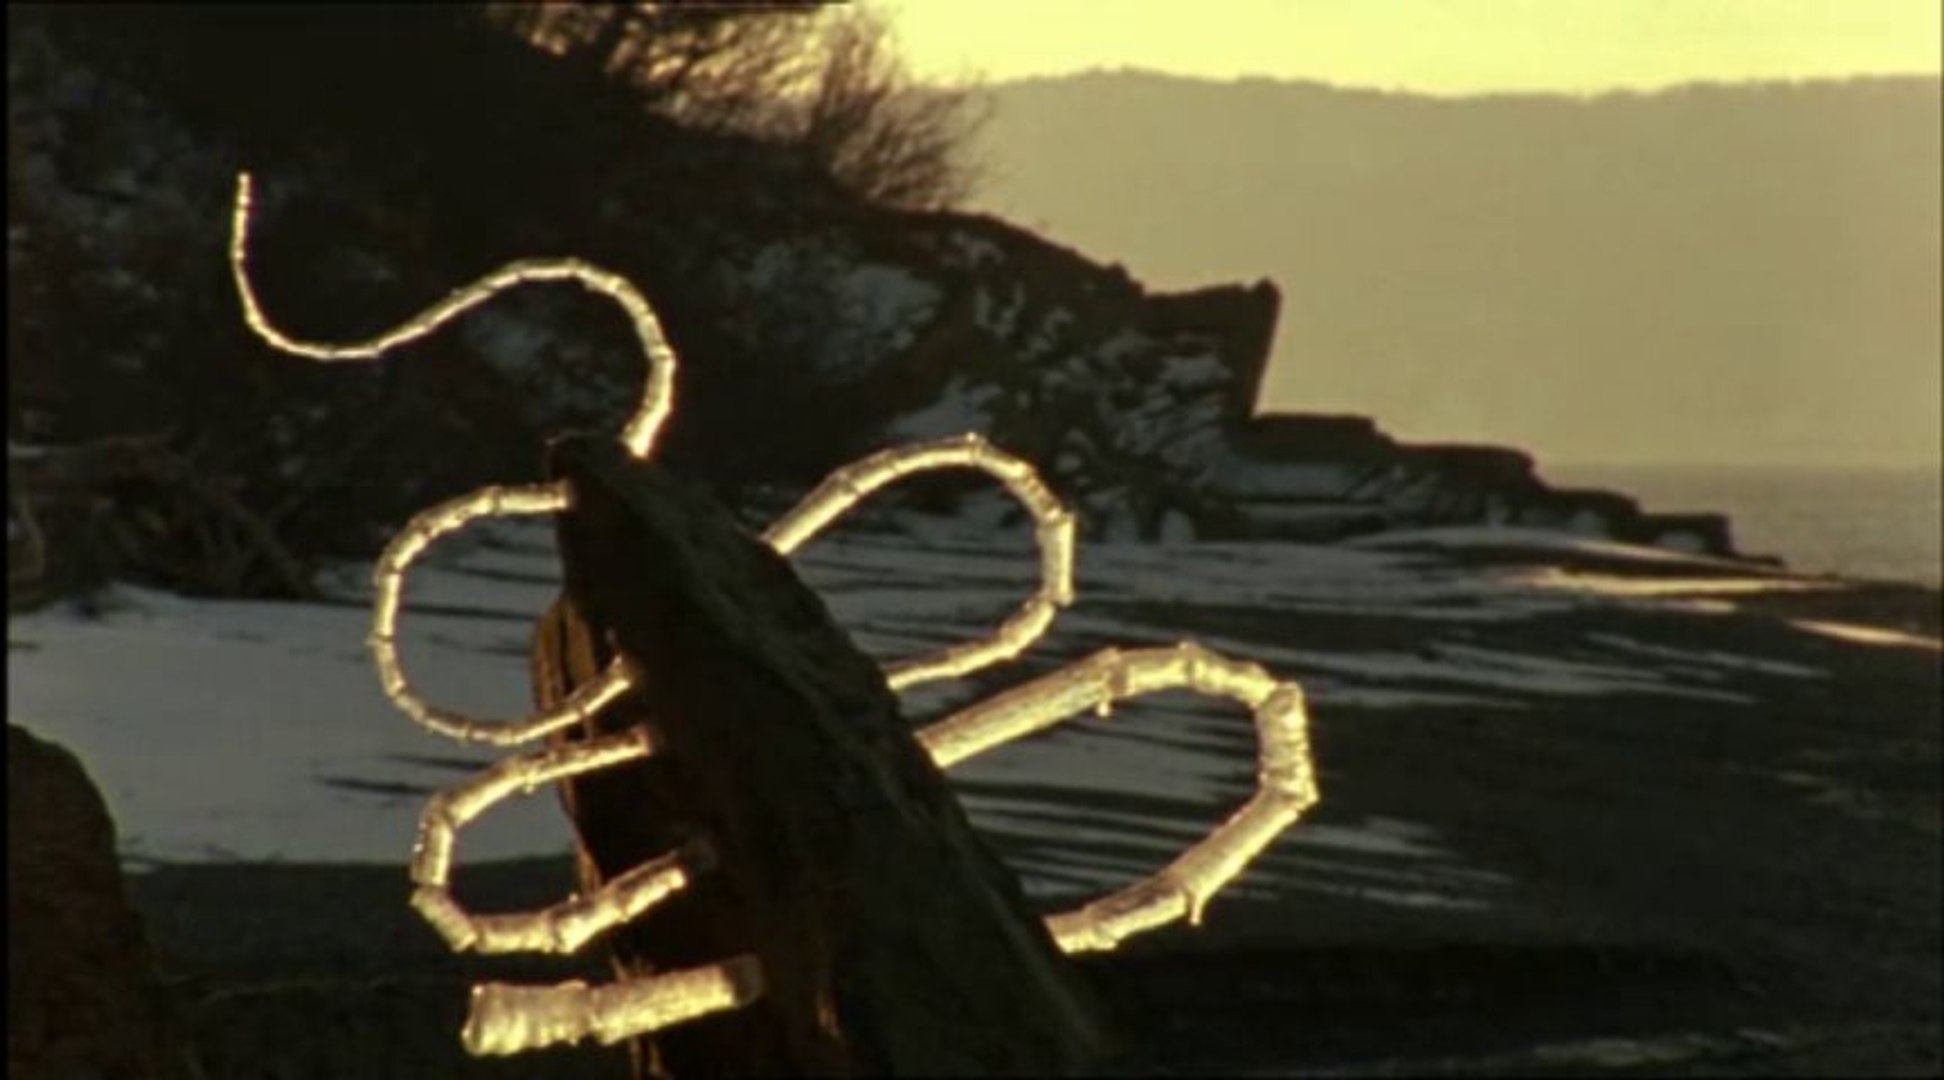 Rivers and Tides: Andy Goldsworthy Working with Time